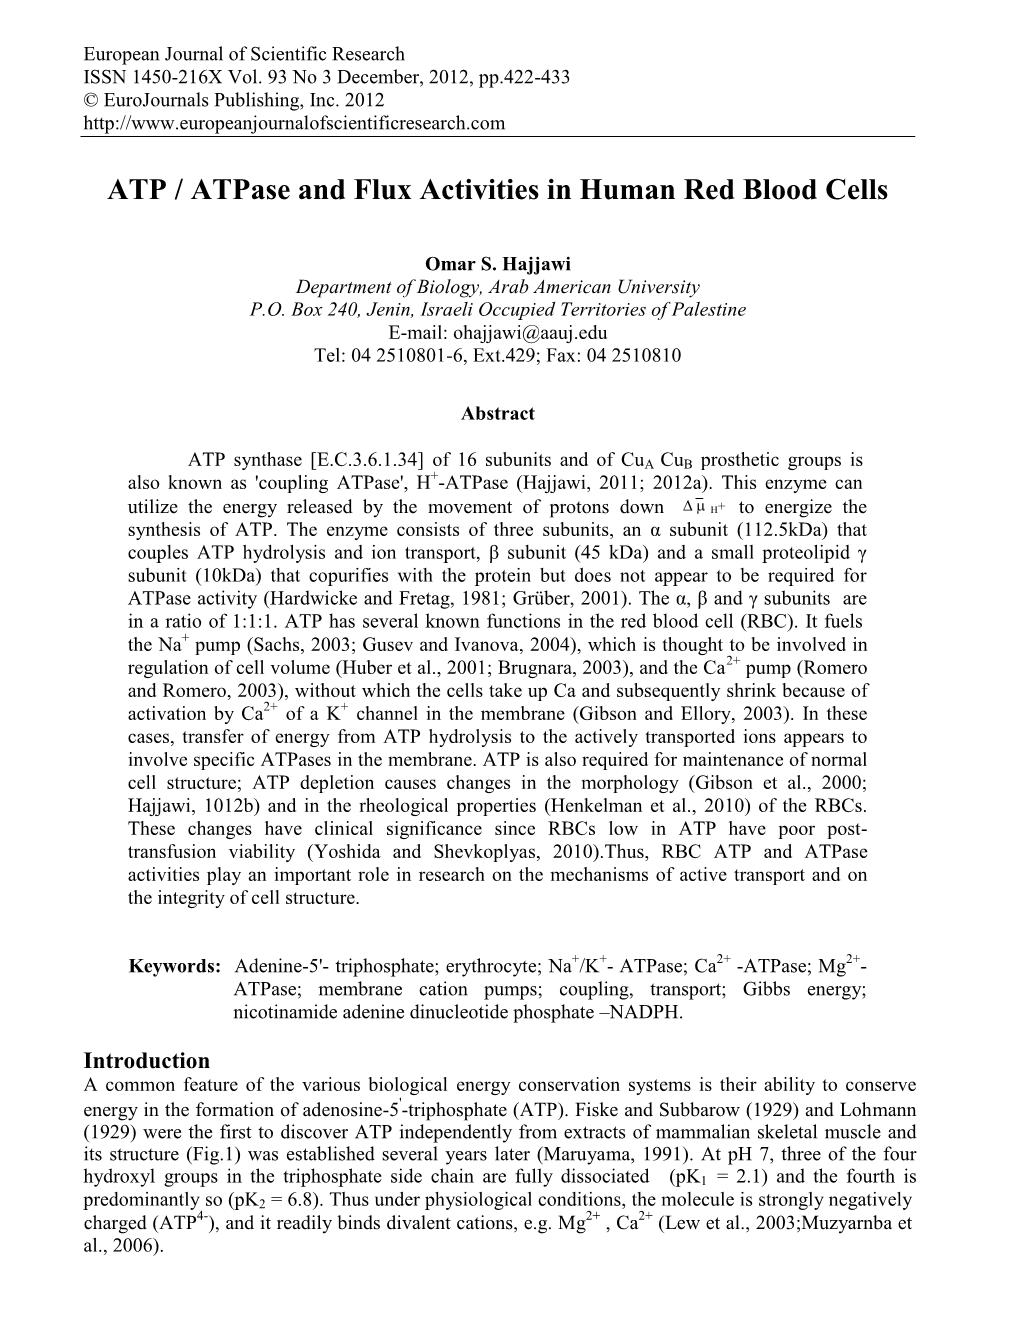 ATP / Atpase and Flux Activities in Human Red Blood Cells